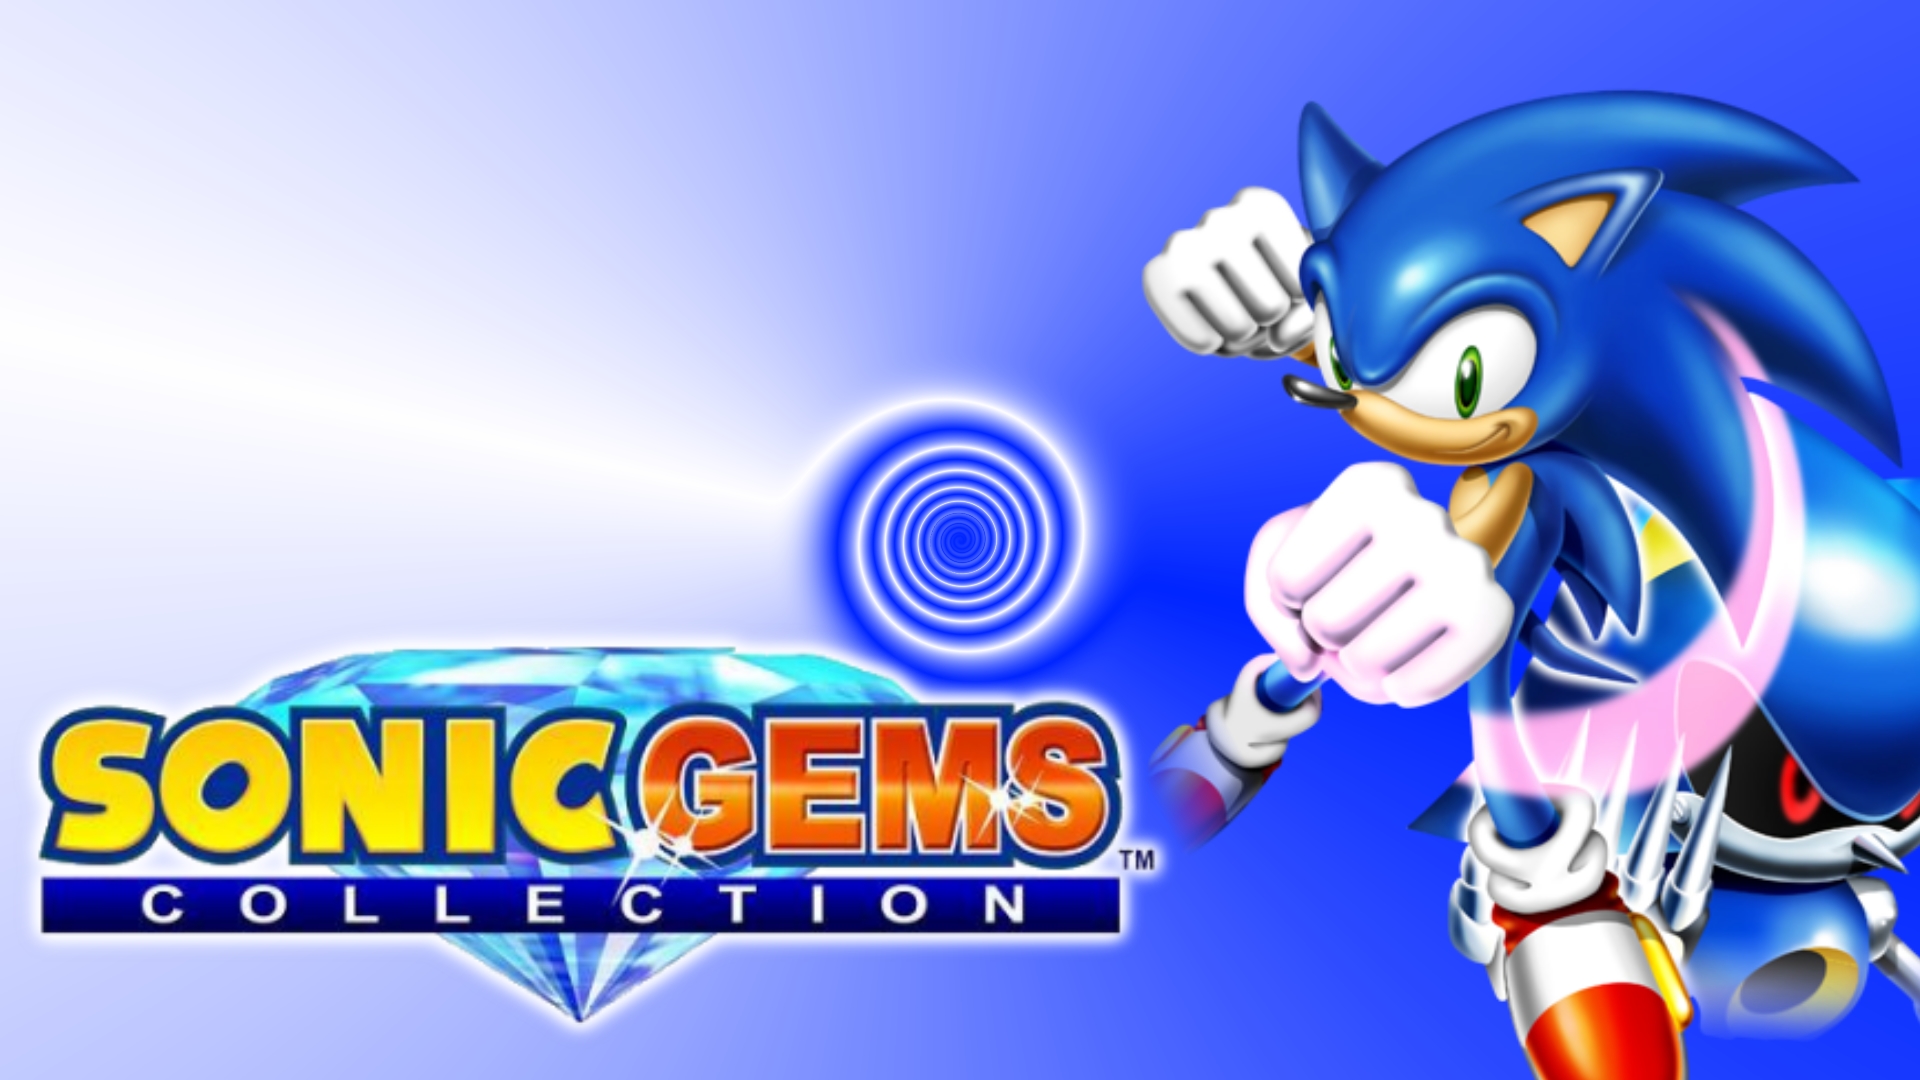 Sonic Gems Collection HD Wallpaper By Bluespeed360